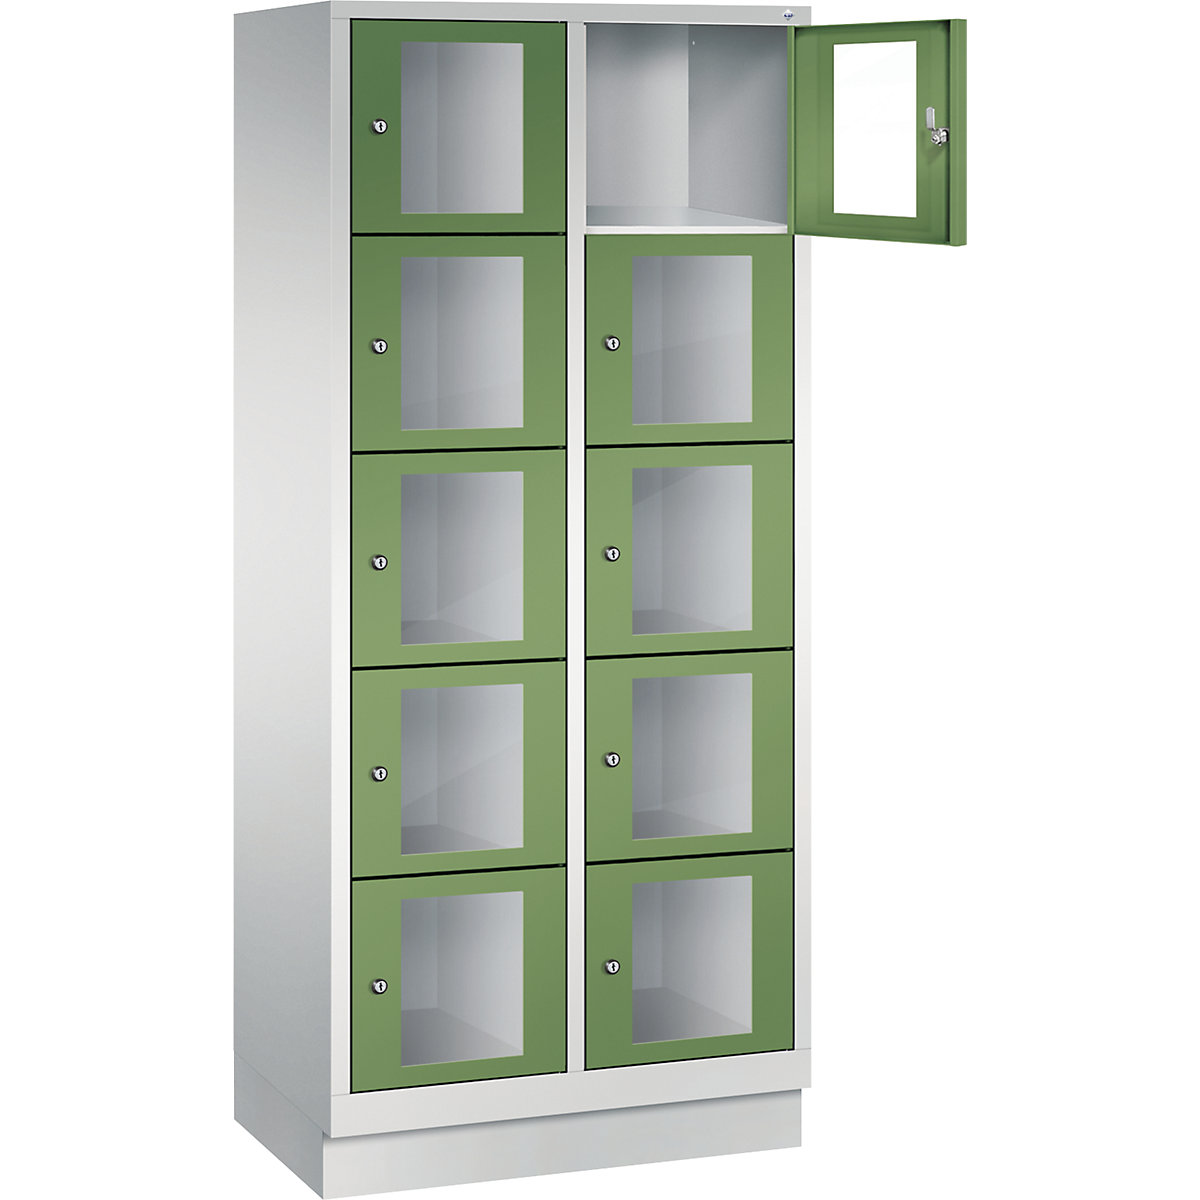 C+P – CLASSIC locker unit, compartment height 295 mm, with plinth, 10 compartments, width 810 mm, reseda green door